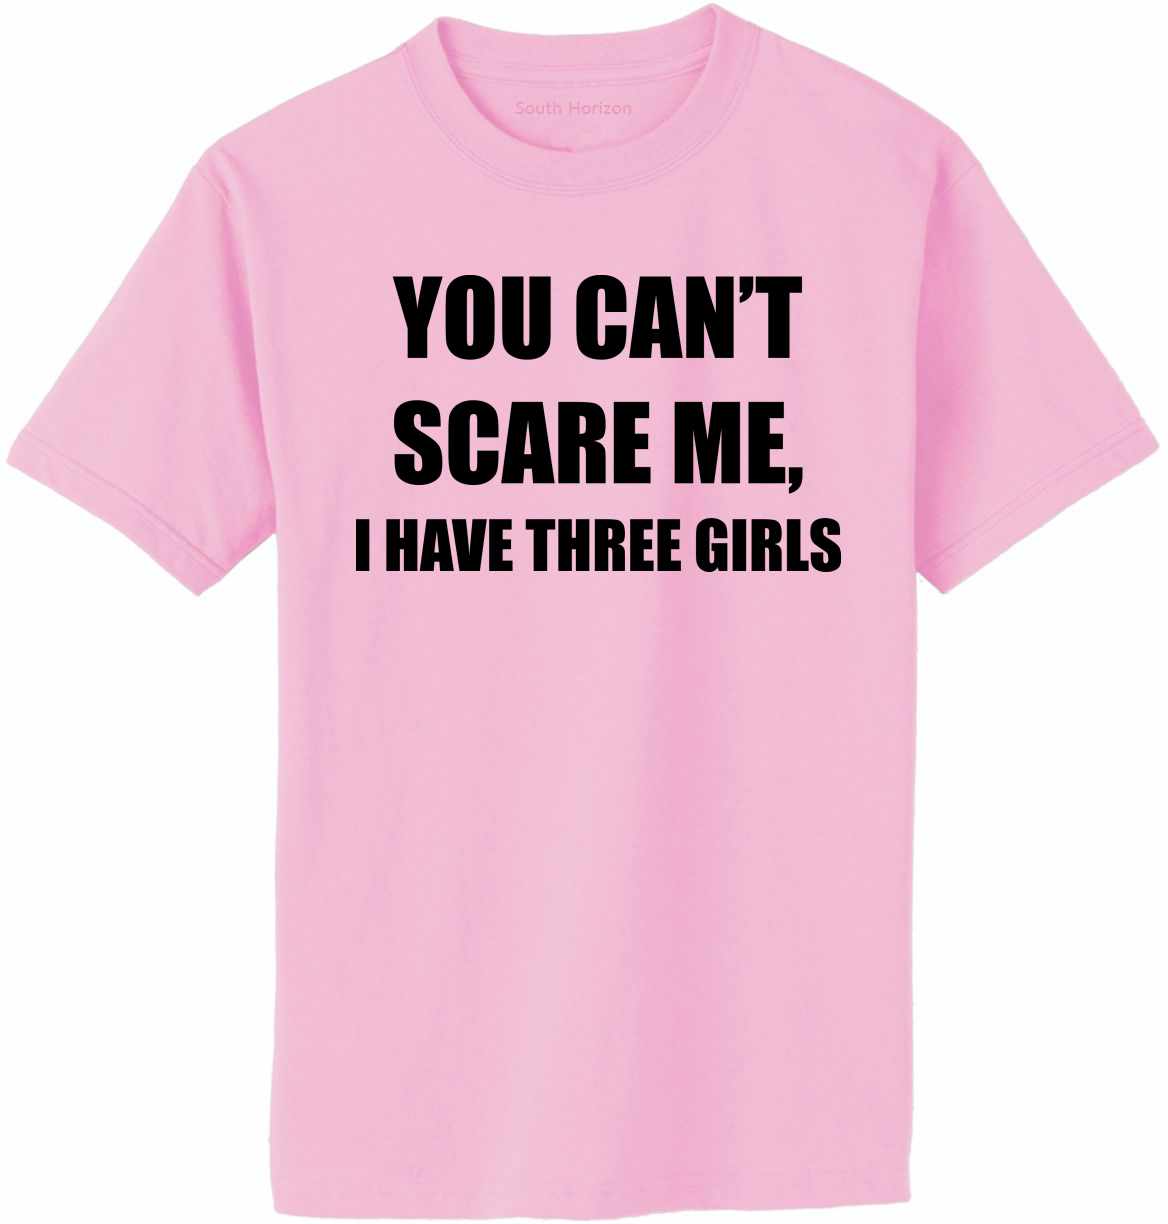 You Can't Scare Me I Have Three Girls Adult T-Shirt (#1121-1)